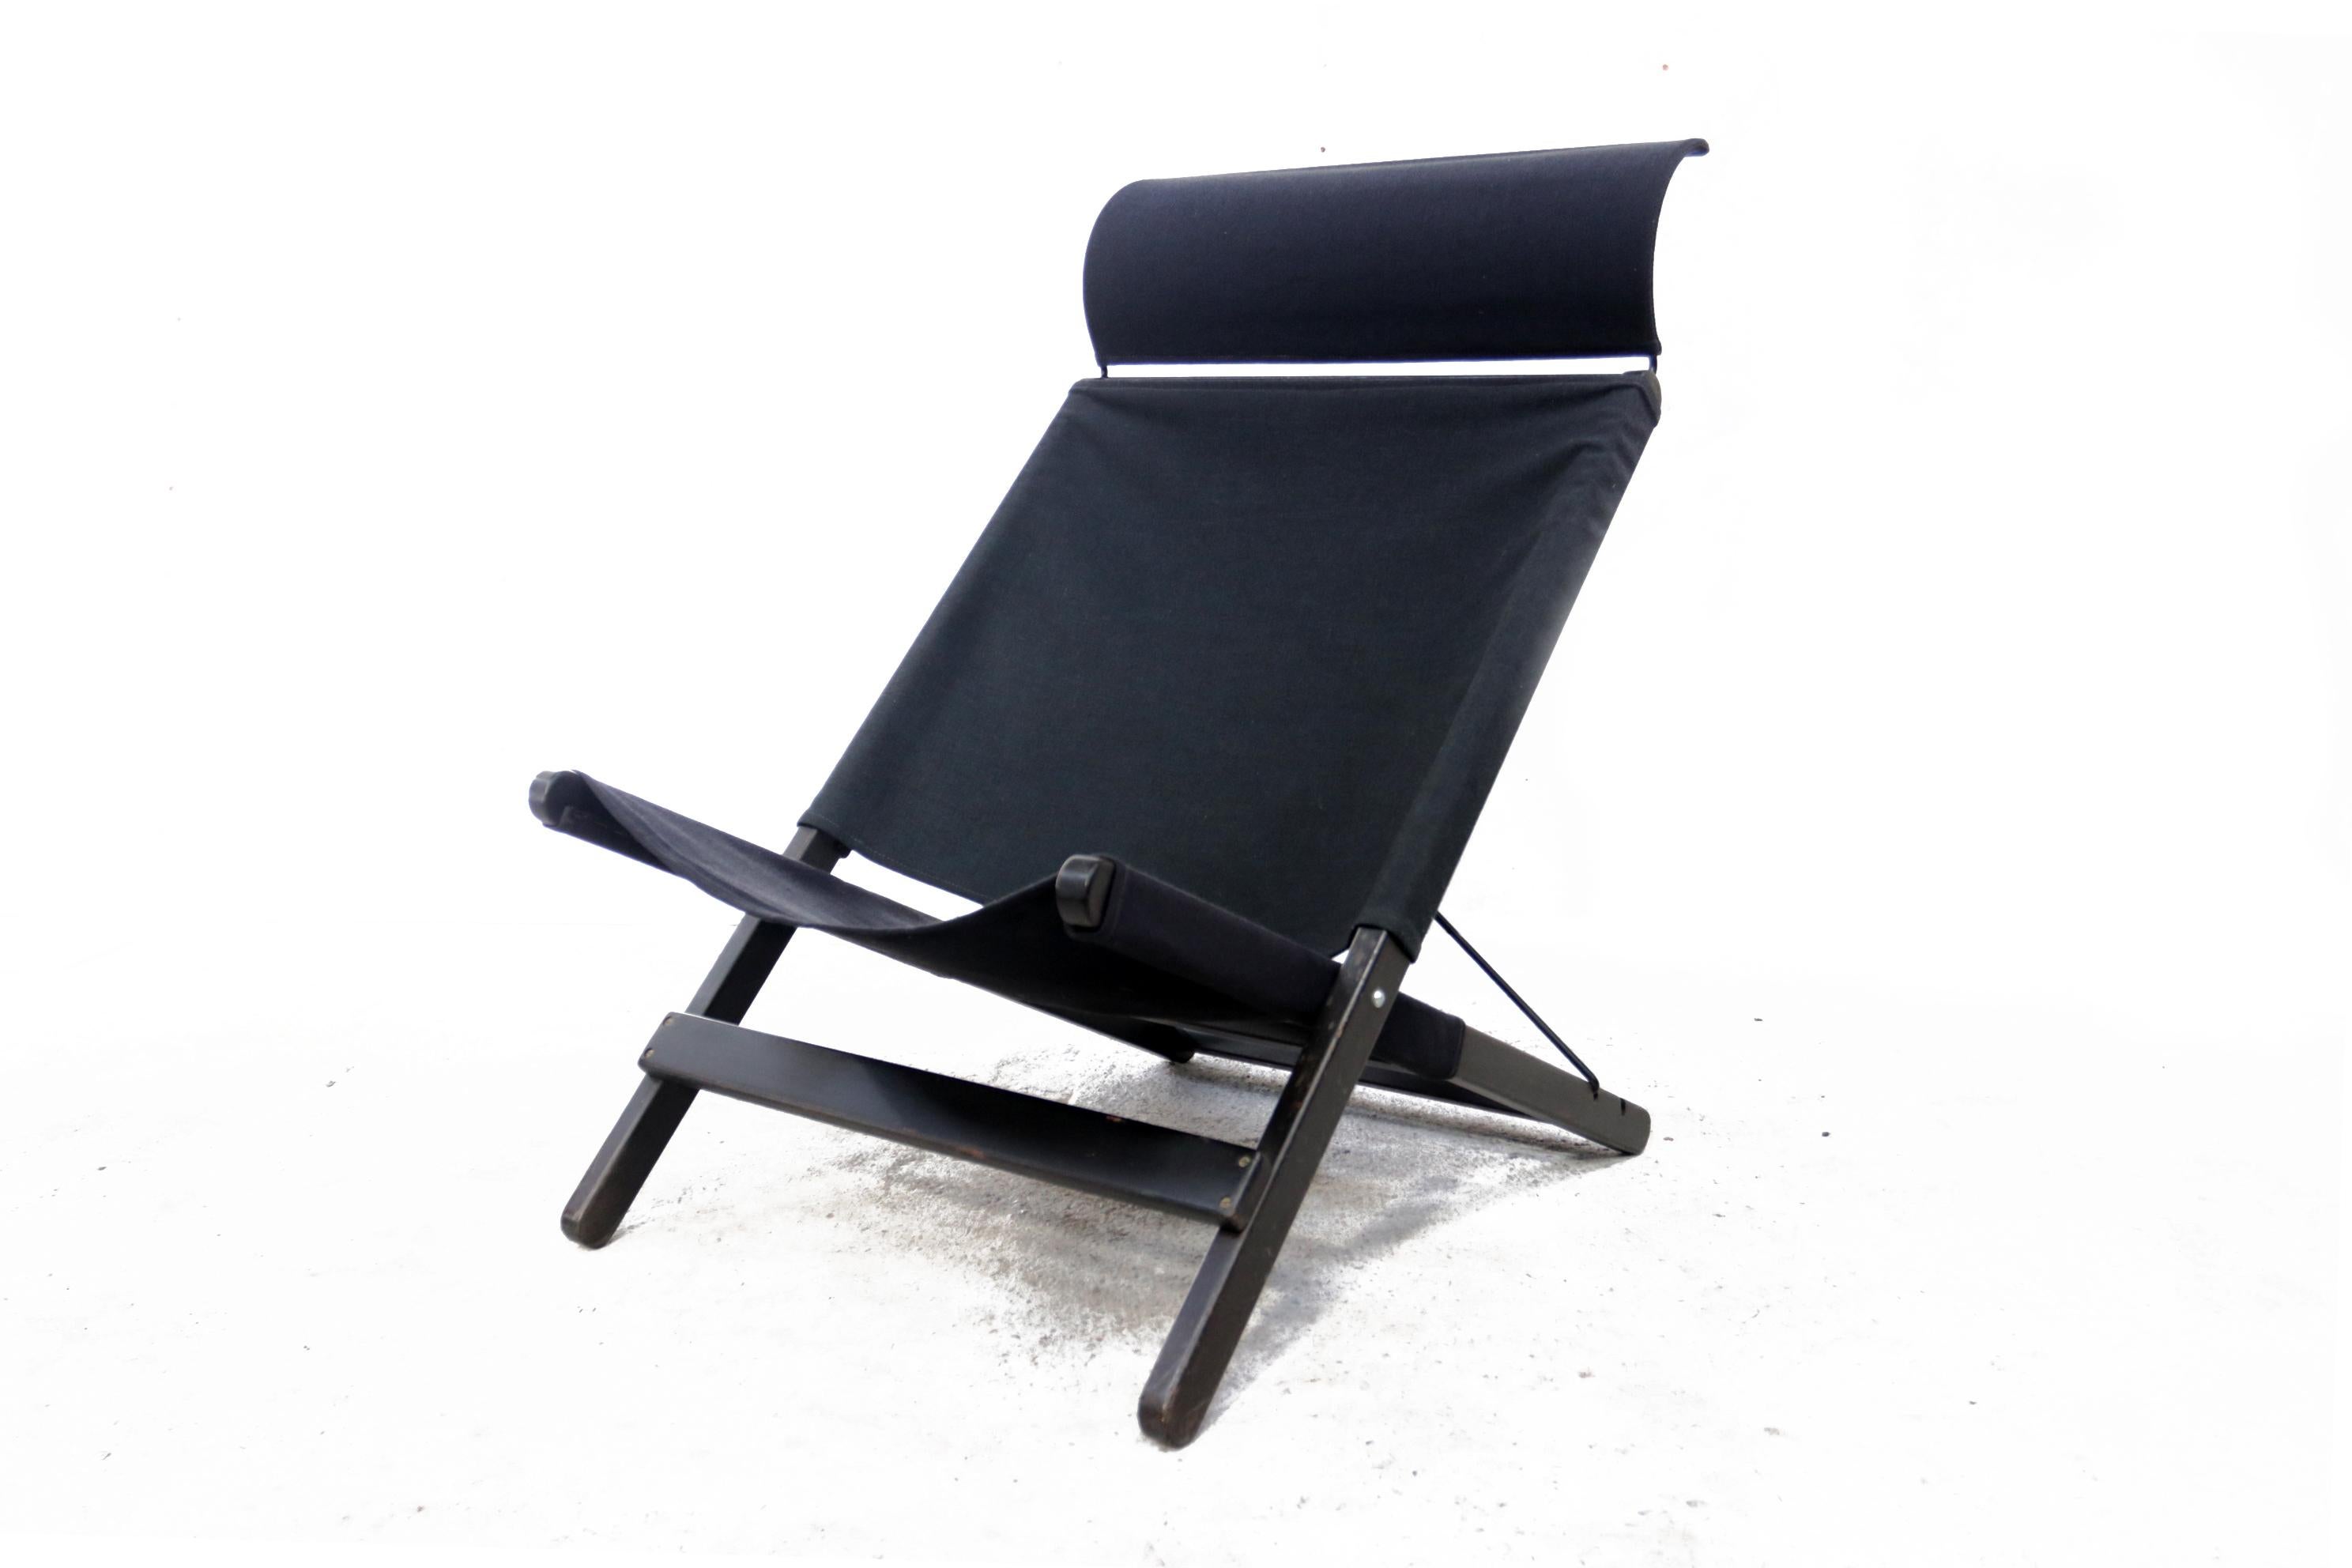 Design folding chair designed by Tord Björklund for Ikea in 1991.
The model is called Hestra. Made from thick jeans fabric, wooden frame and metal cross and headrest.
This chair fits like a hammock, so close your eyes and you're on vacation!
 